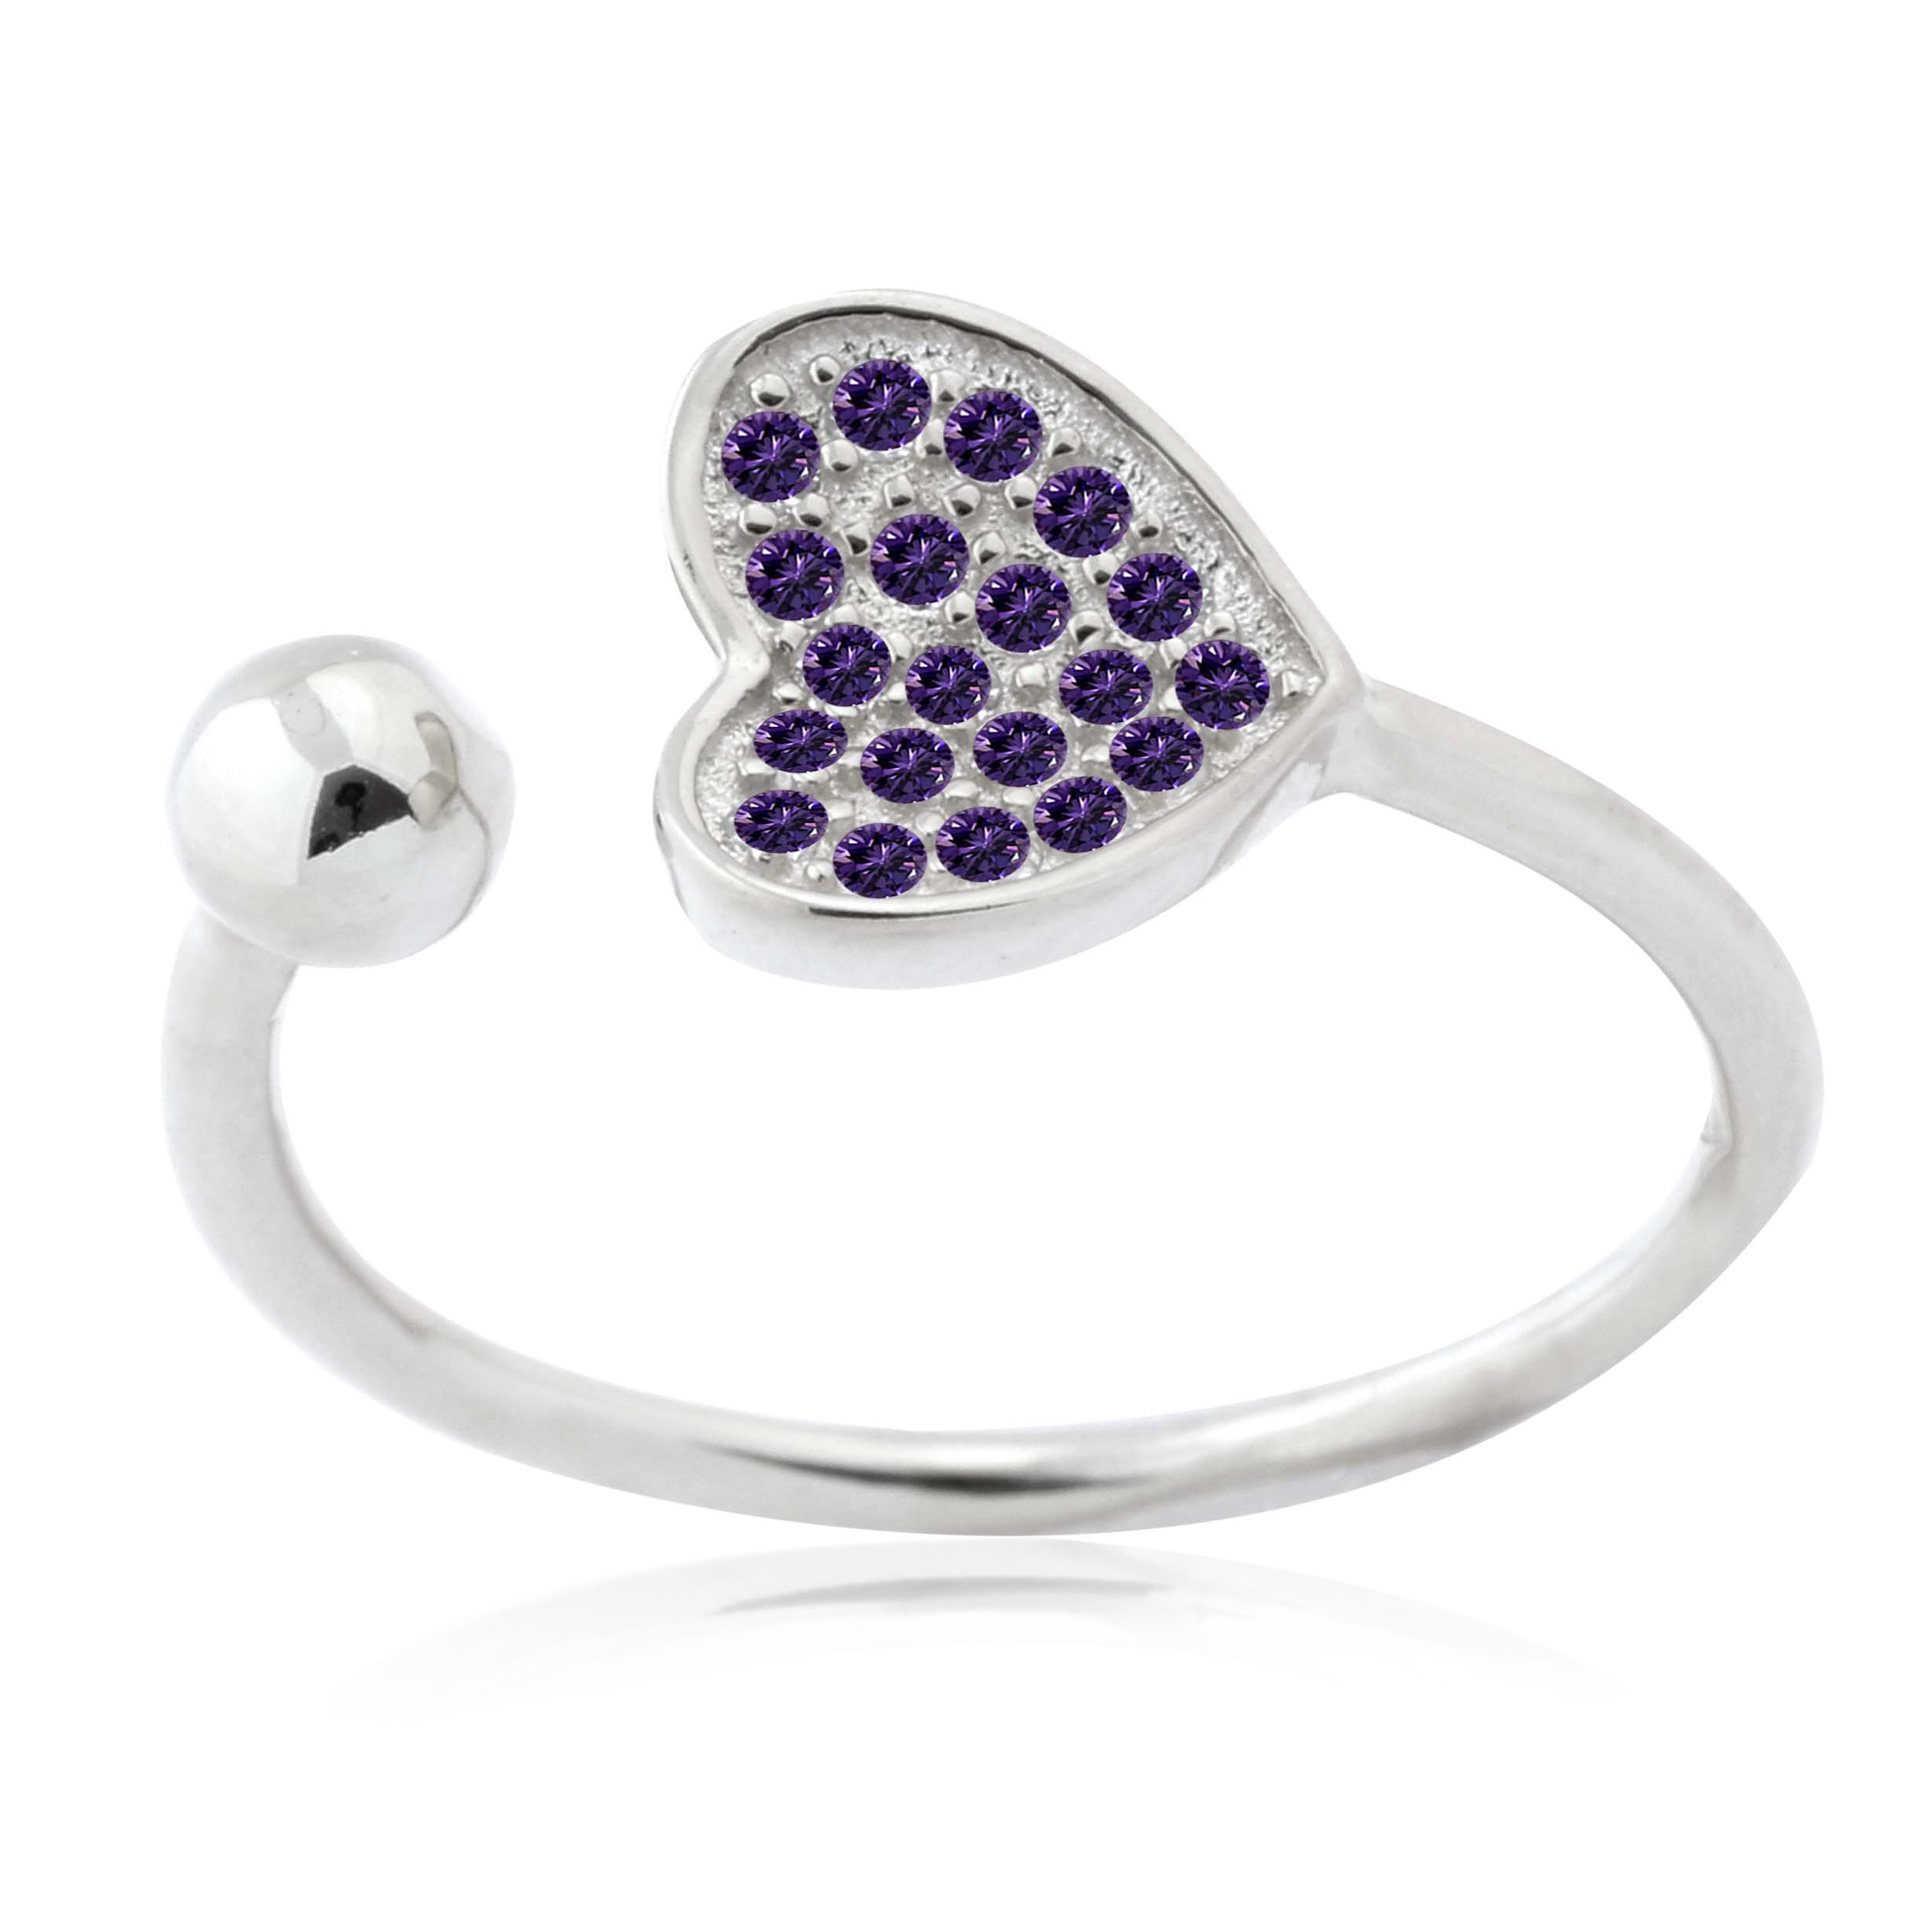 Adjustable Heart Ring in Sterling Silver Pavé with CZ